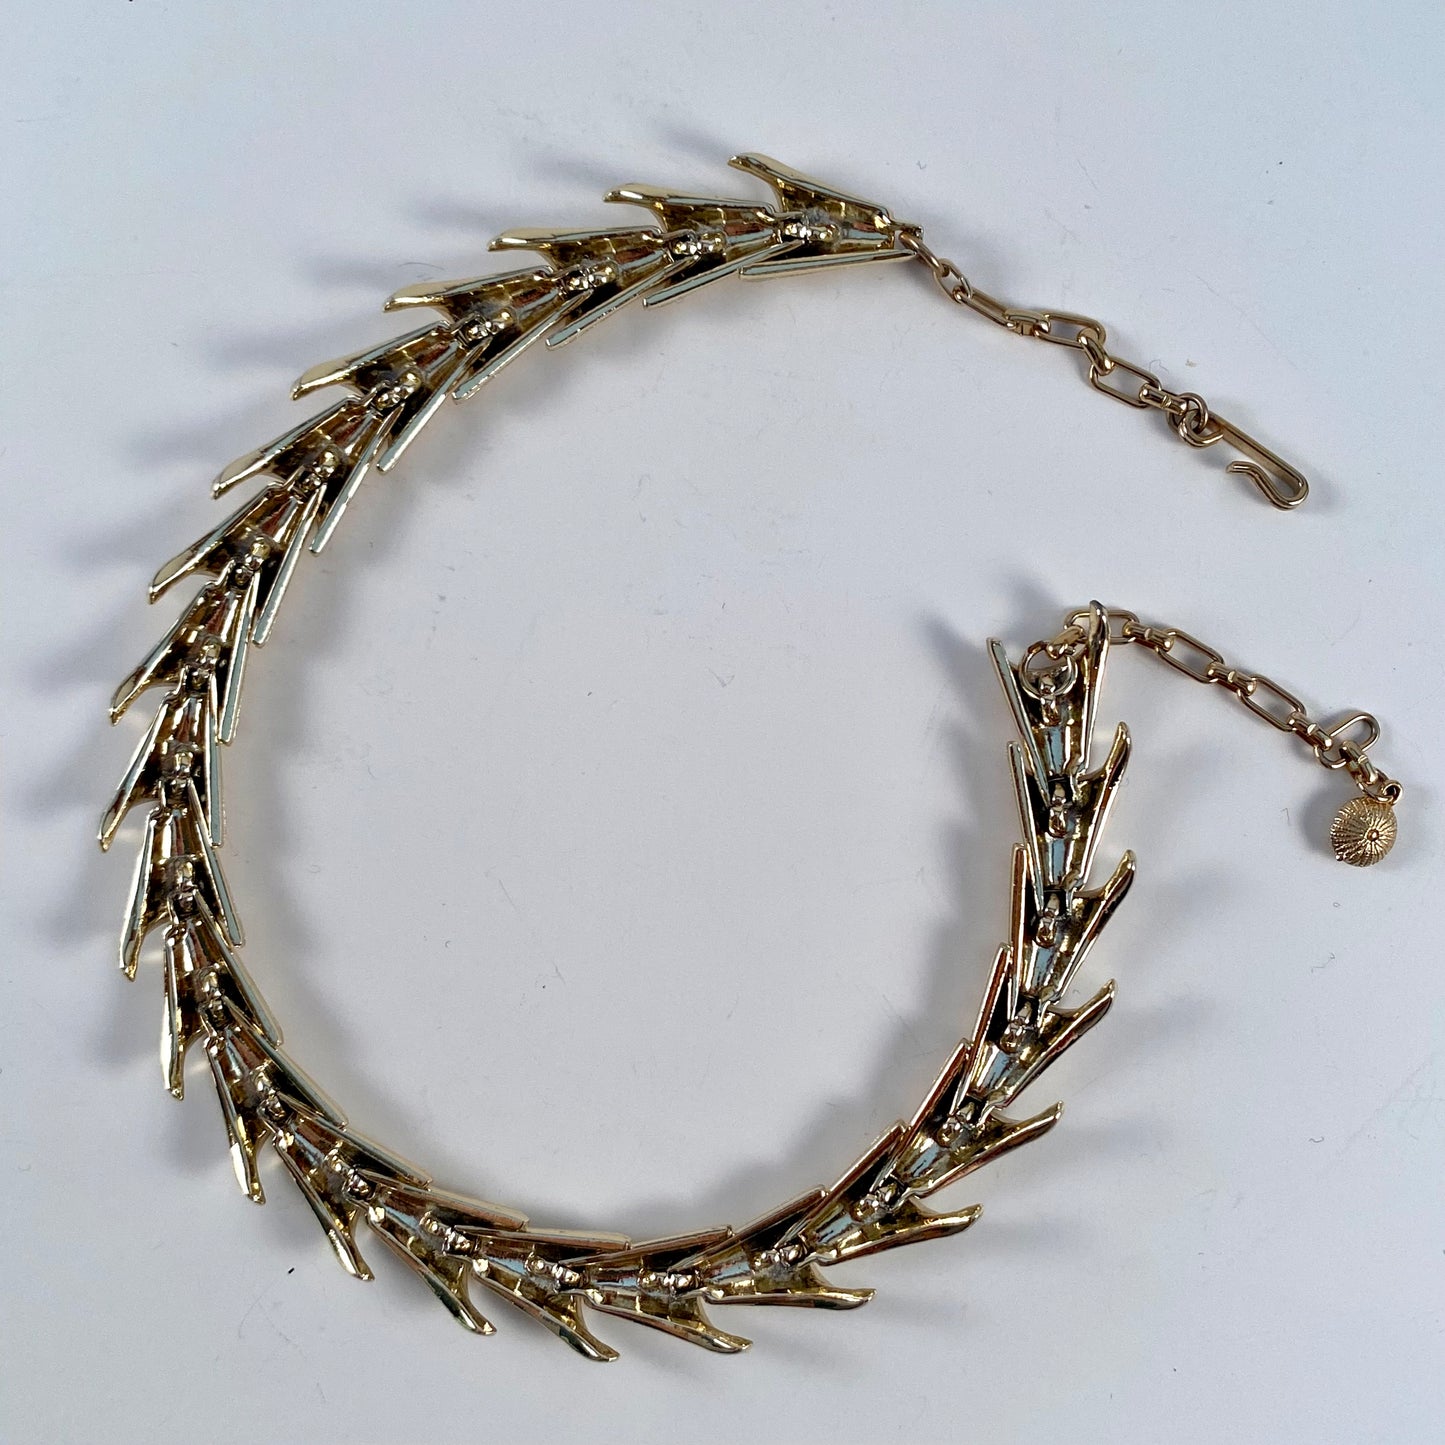 Late 50s/ Early 60s Light Gold-Tone Choker Necklace